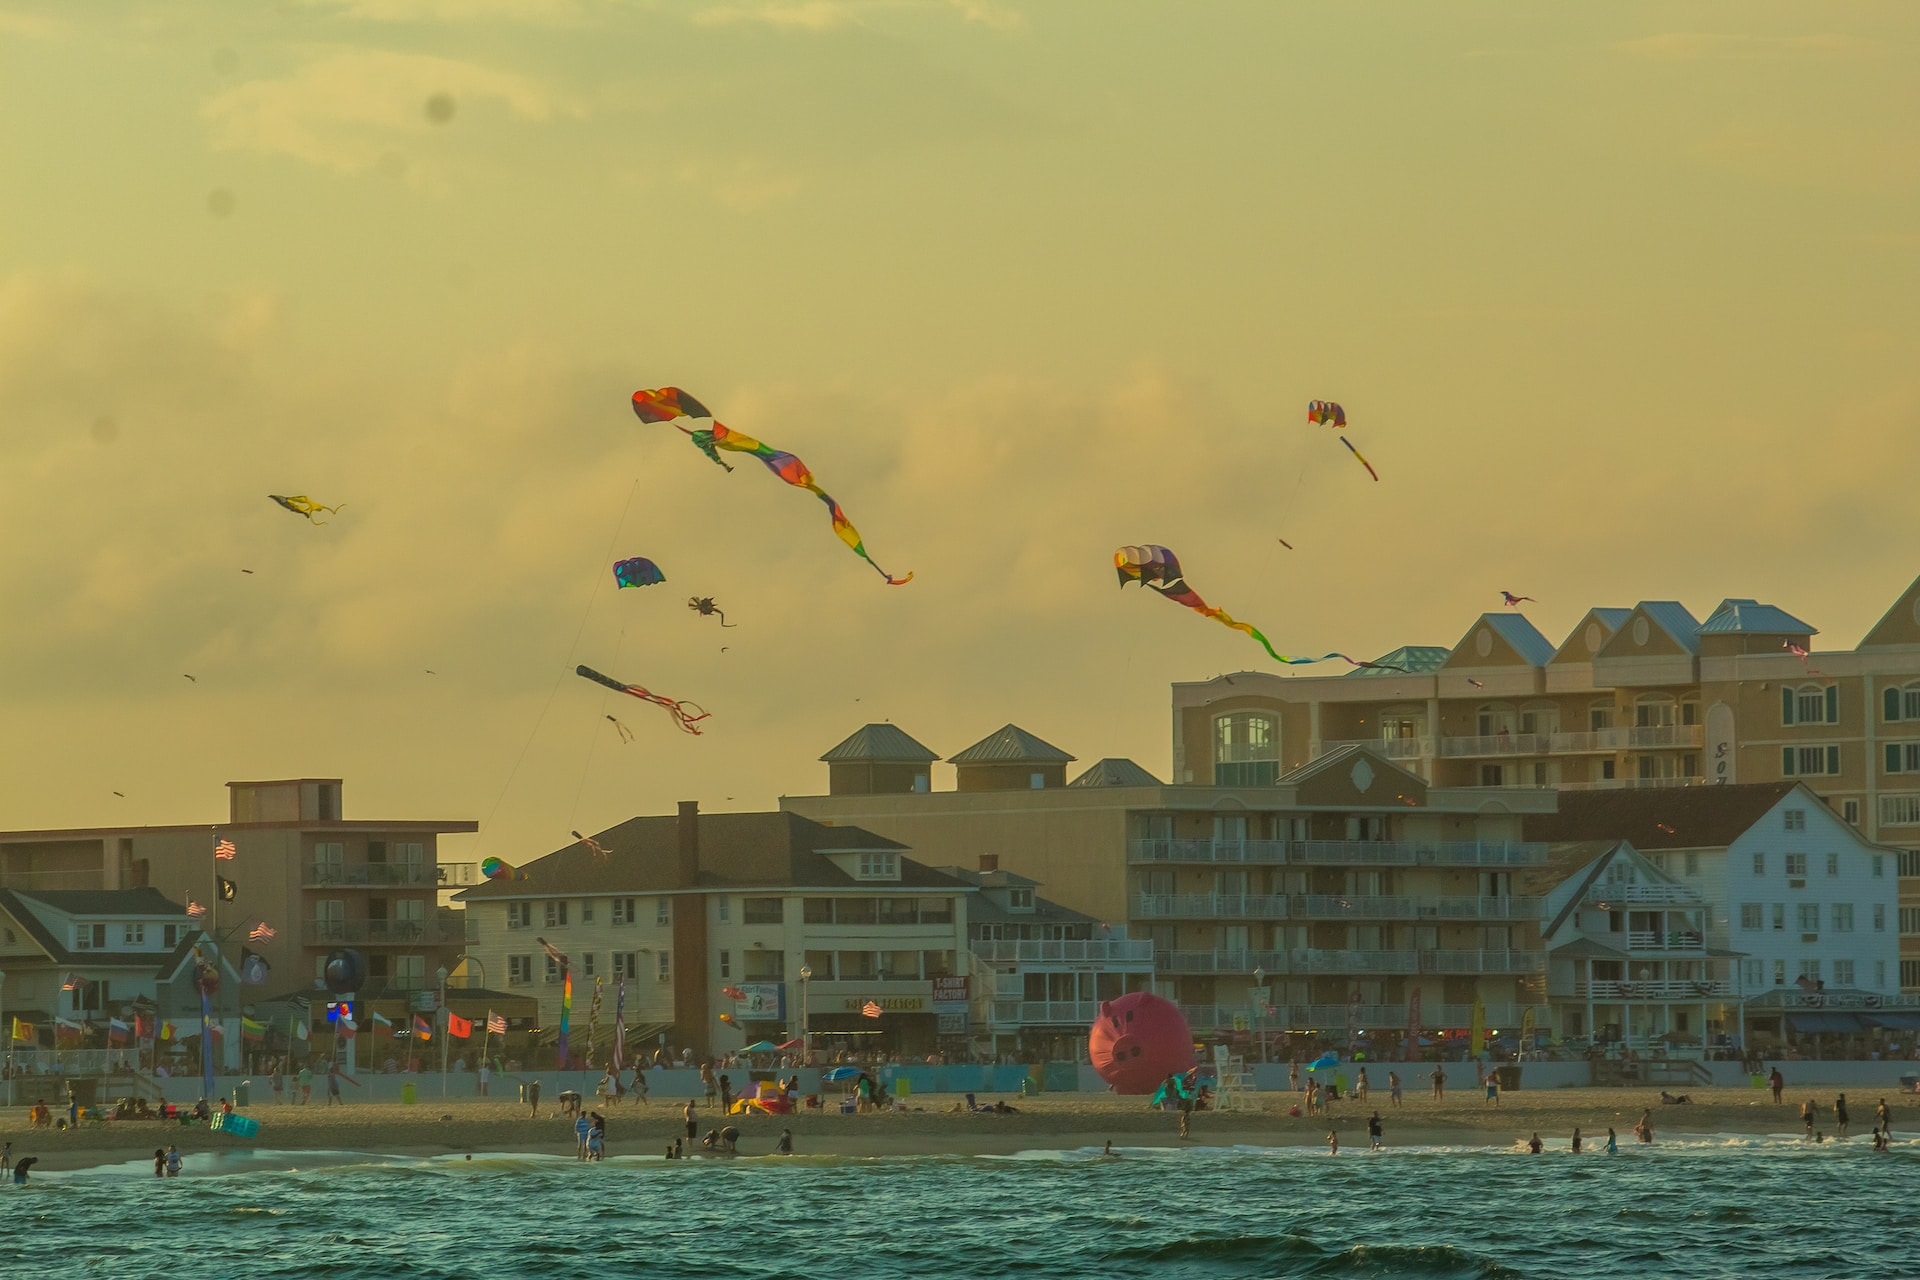 A busy beach in the state of Maryland during the summer, featuring many beachgoers relaxing and flying kites while the sun sets.